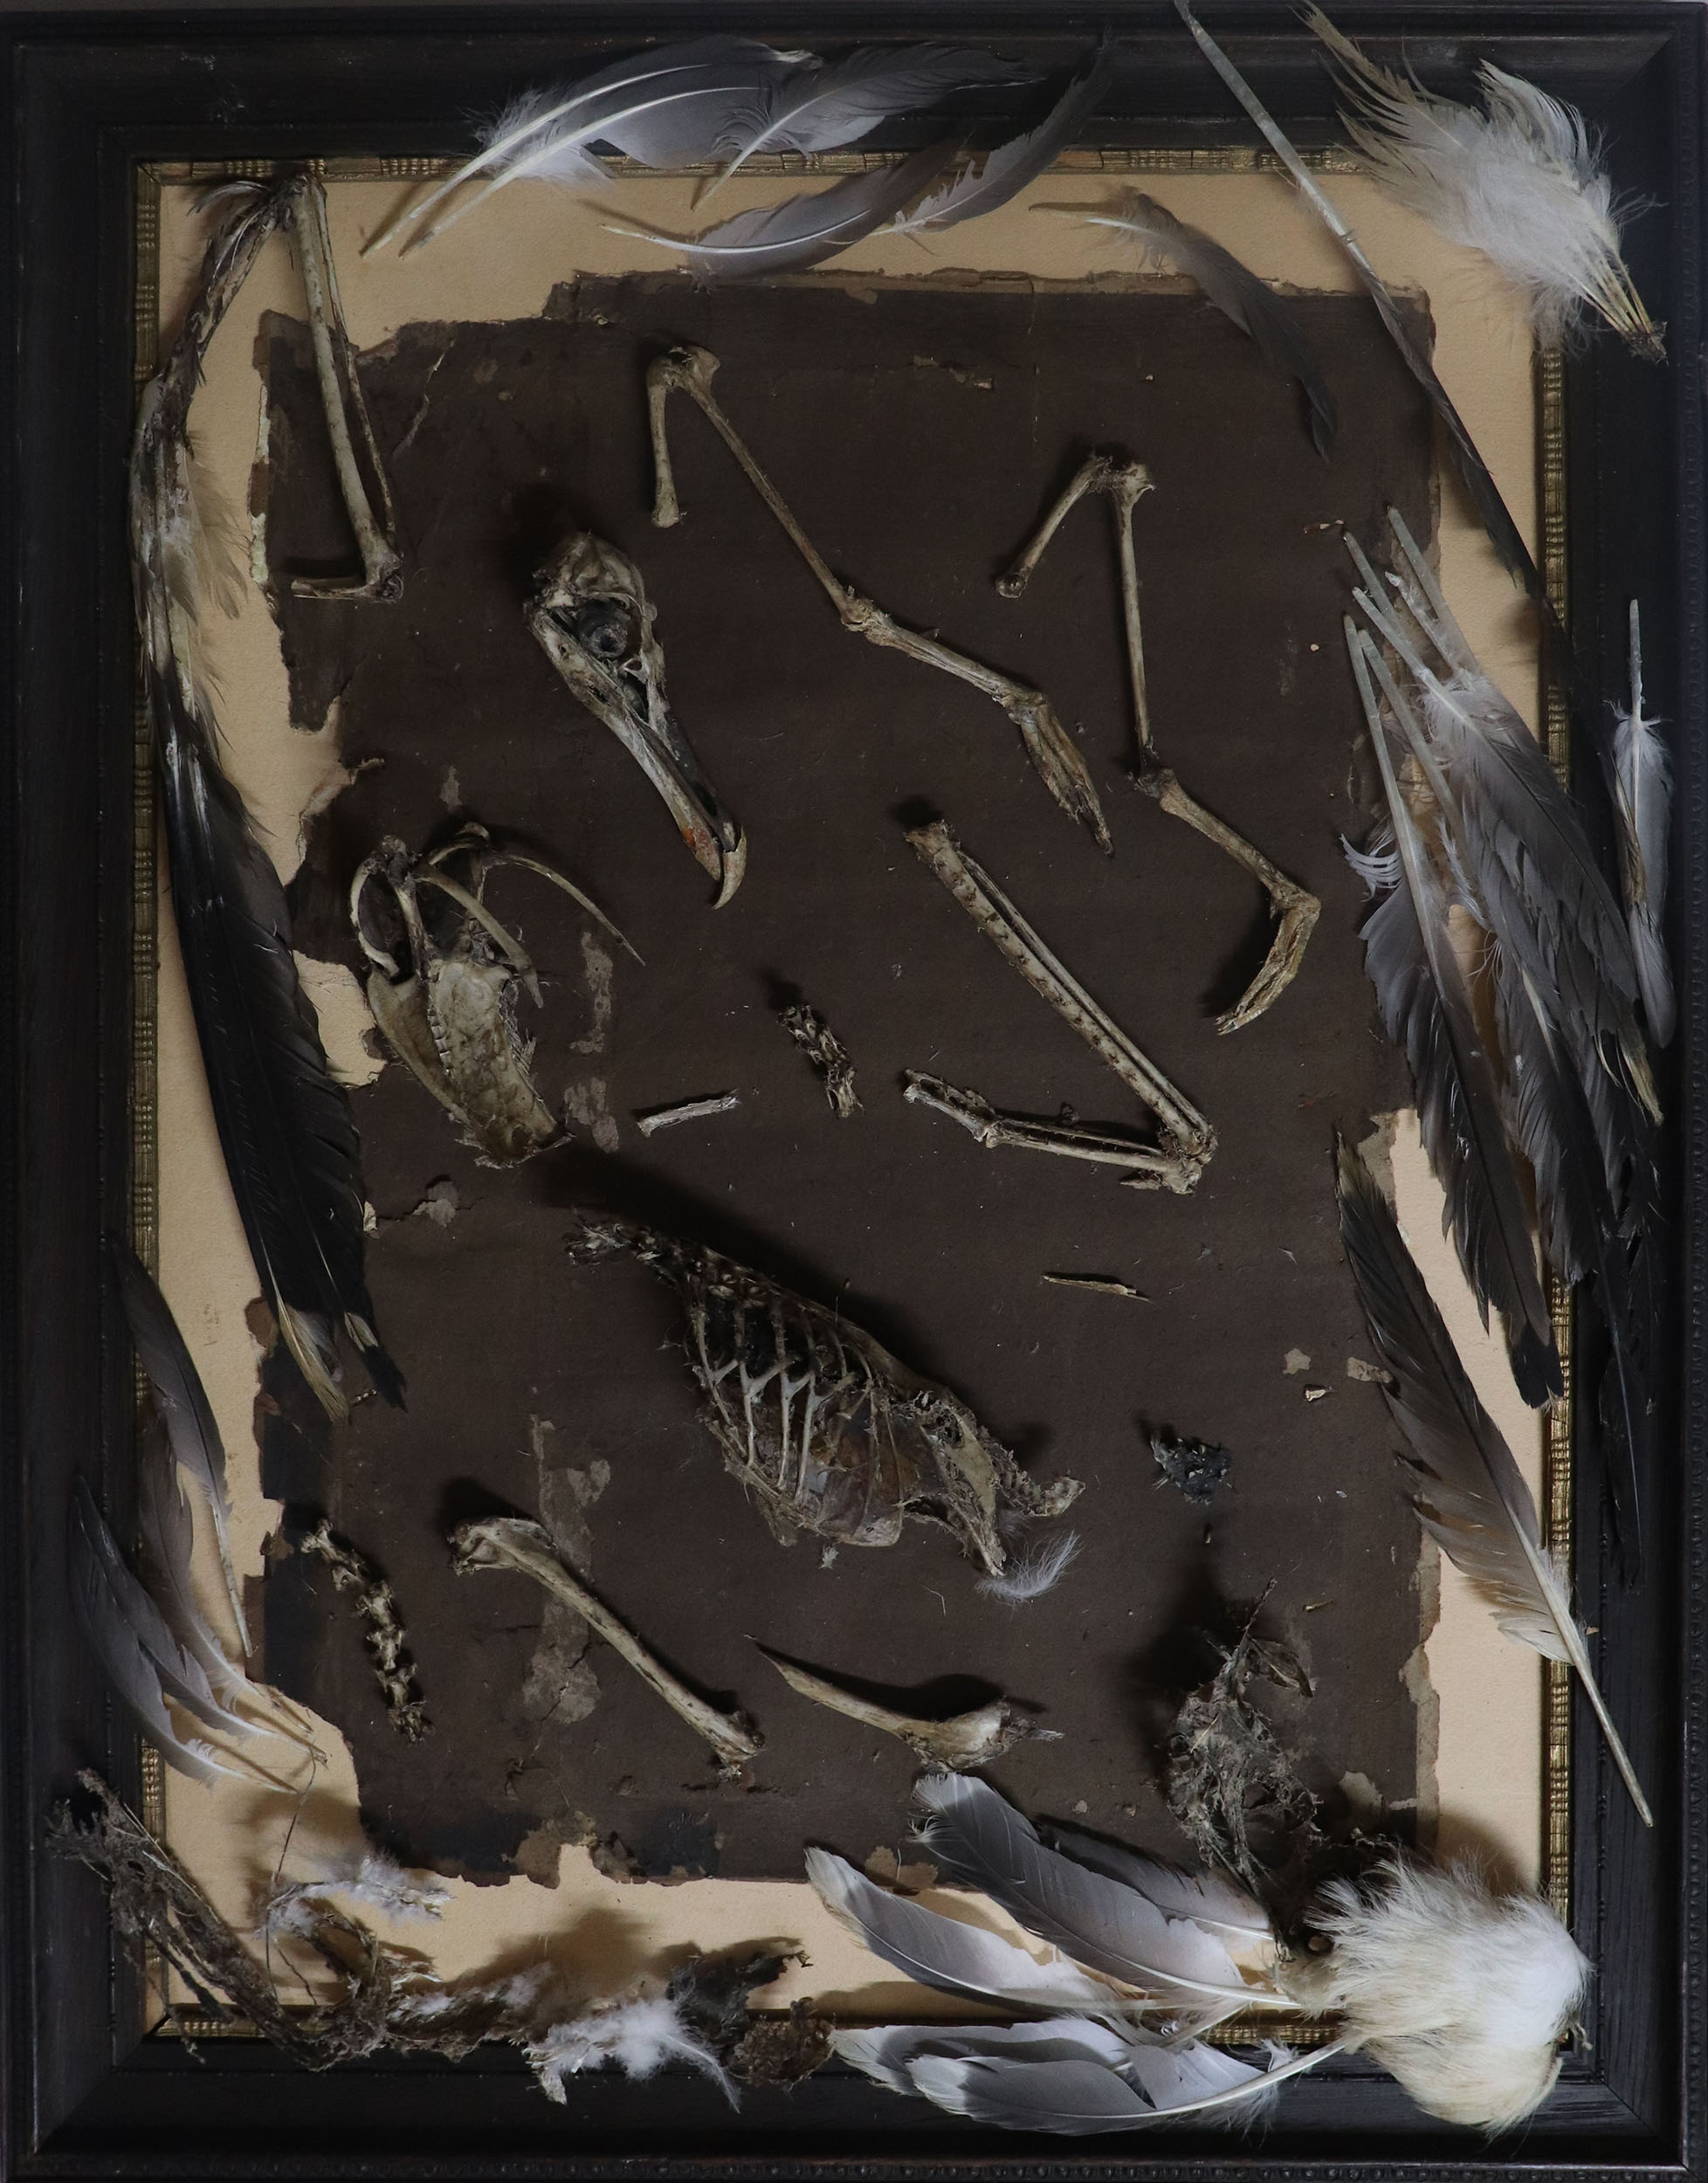 Wall hanging artwork by Zoë Bullen, displaying broken skeletal remains with some feathers, of a roadkill seagull, arranged over old picture frame backing paper, and old wooden picture frame.